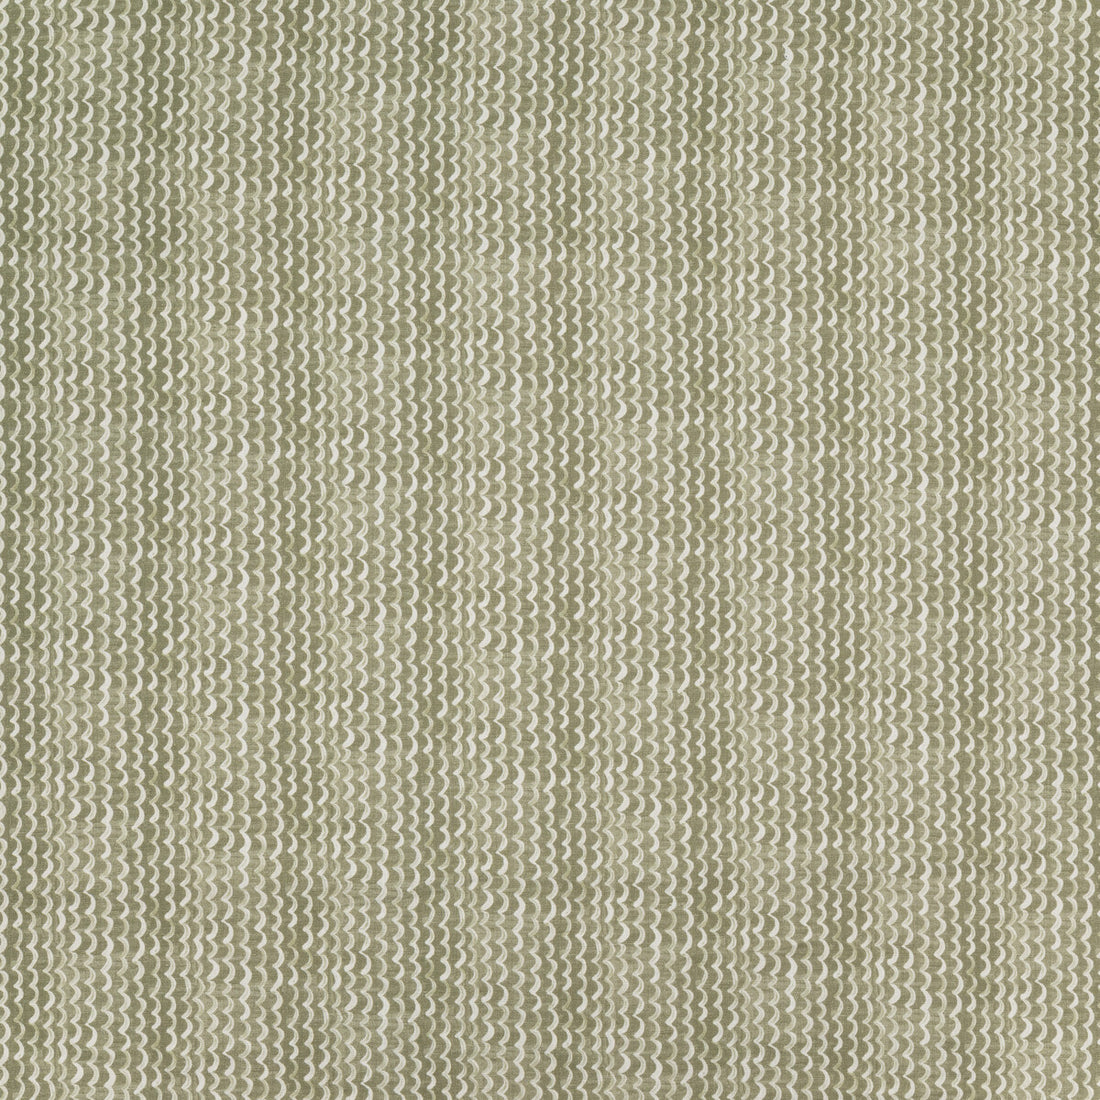 Camden fabric in sage color - pattern BFC-3704.130.0 - by Lee Jofa in the Blithfield Eden collection